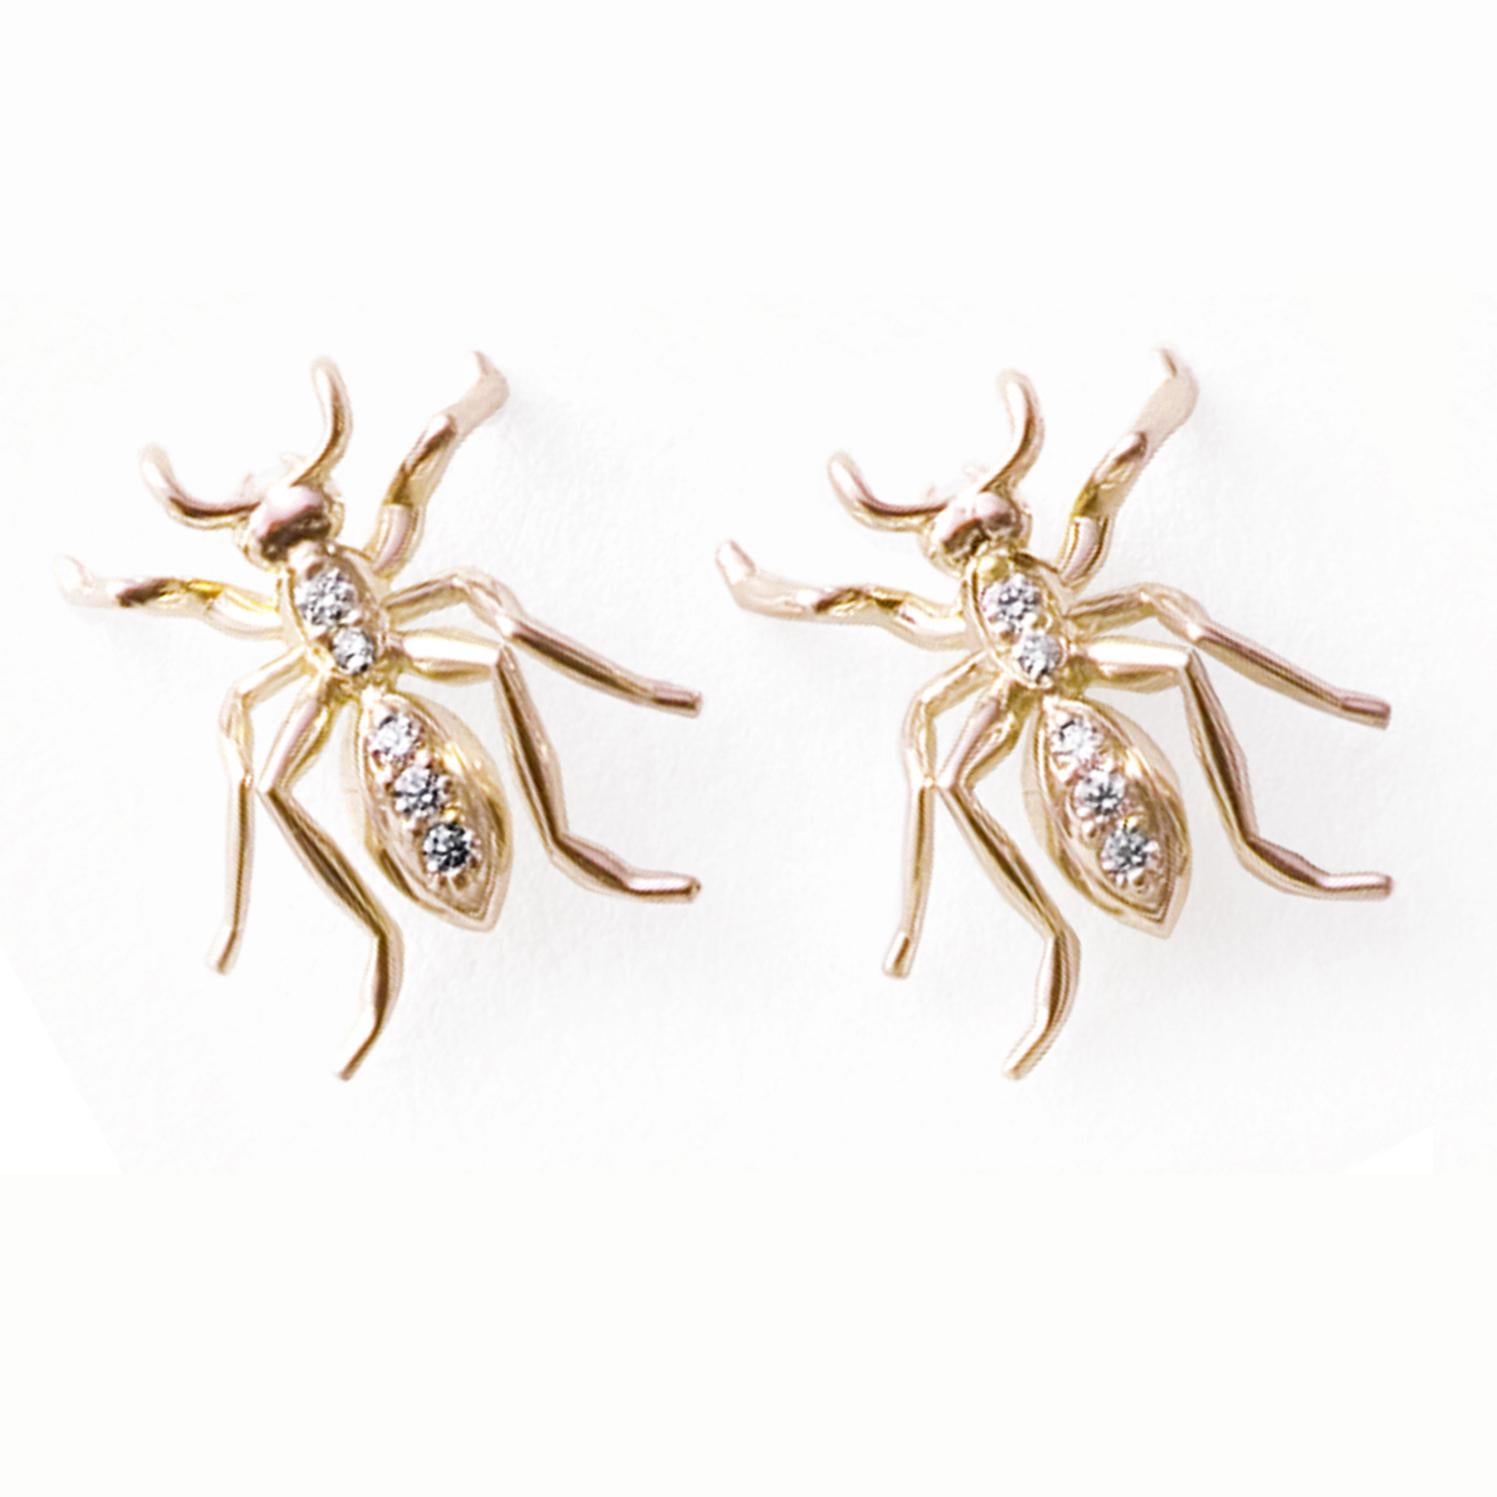 crafted from luxurious 14k yellow gold and featuring 10 round brilliant-cut diamonds pave set to perfection. These earrings are anatomically perfect and capture the light in a way that is sure to catch the eye of anyone in their presence. With their